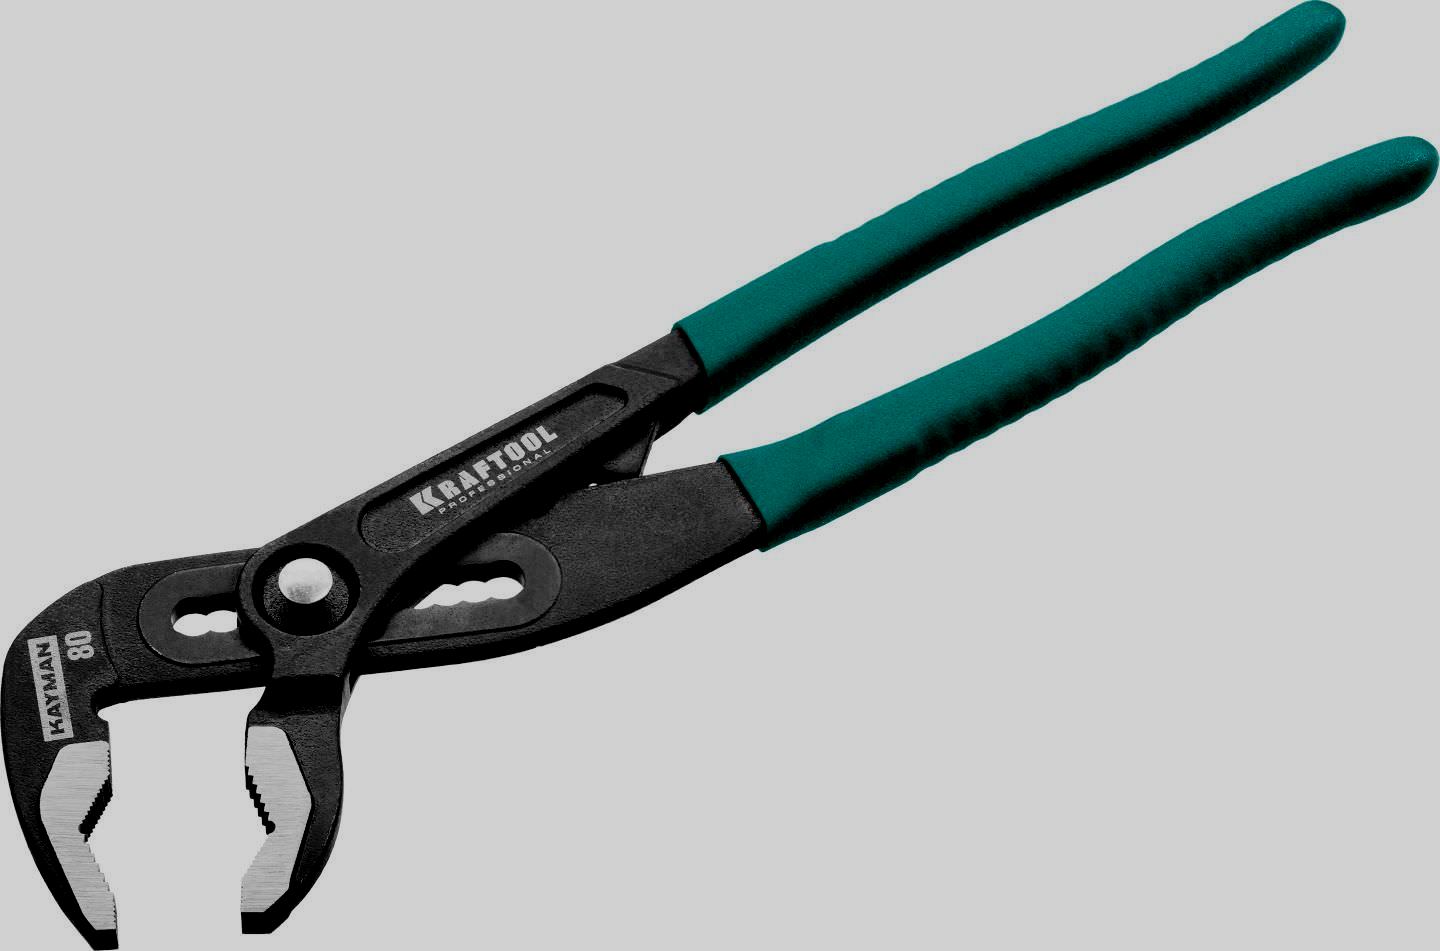 Rating of the best adjustable pliers for 2022